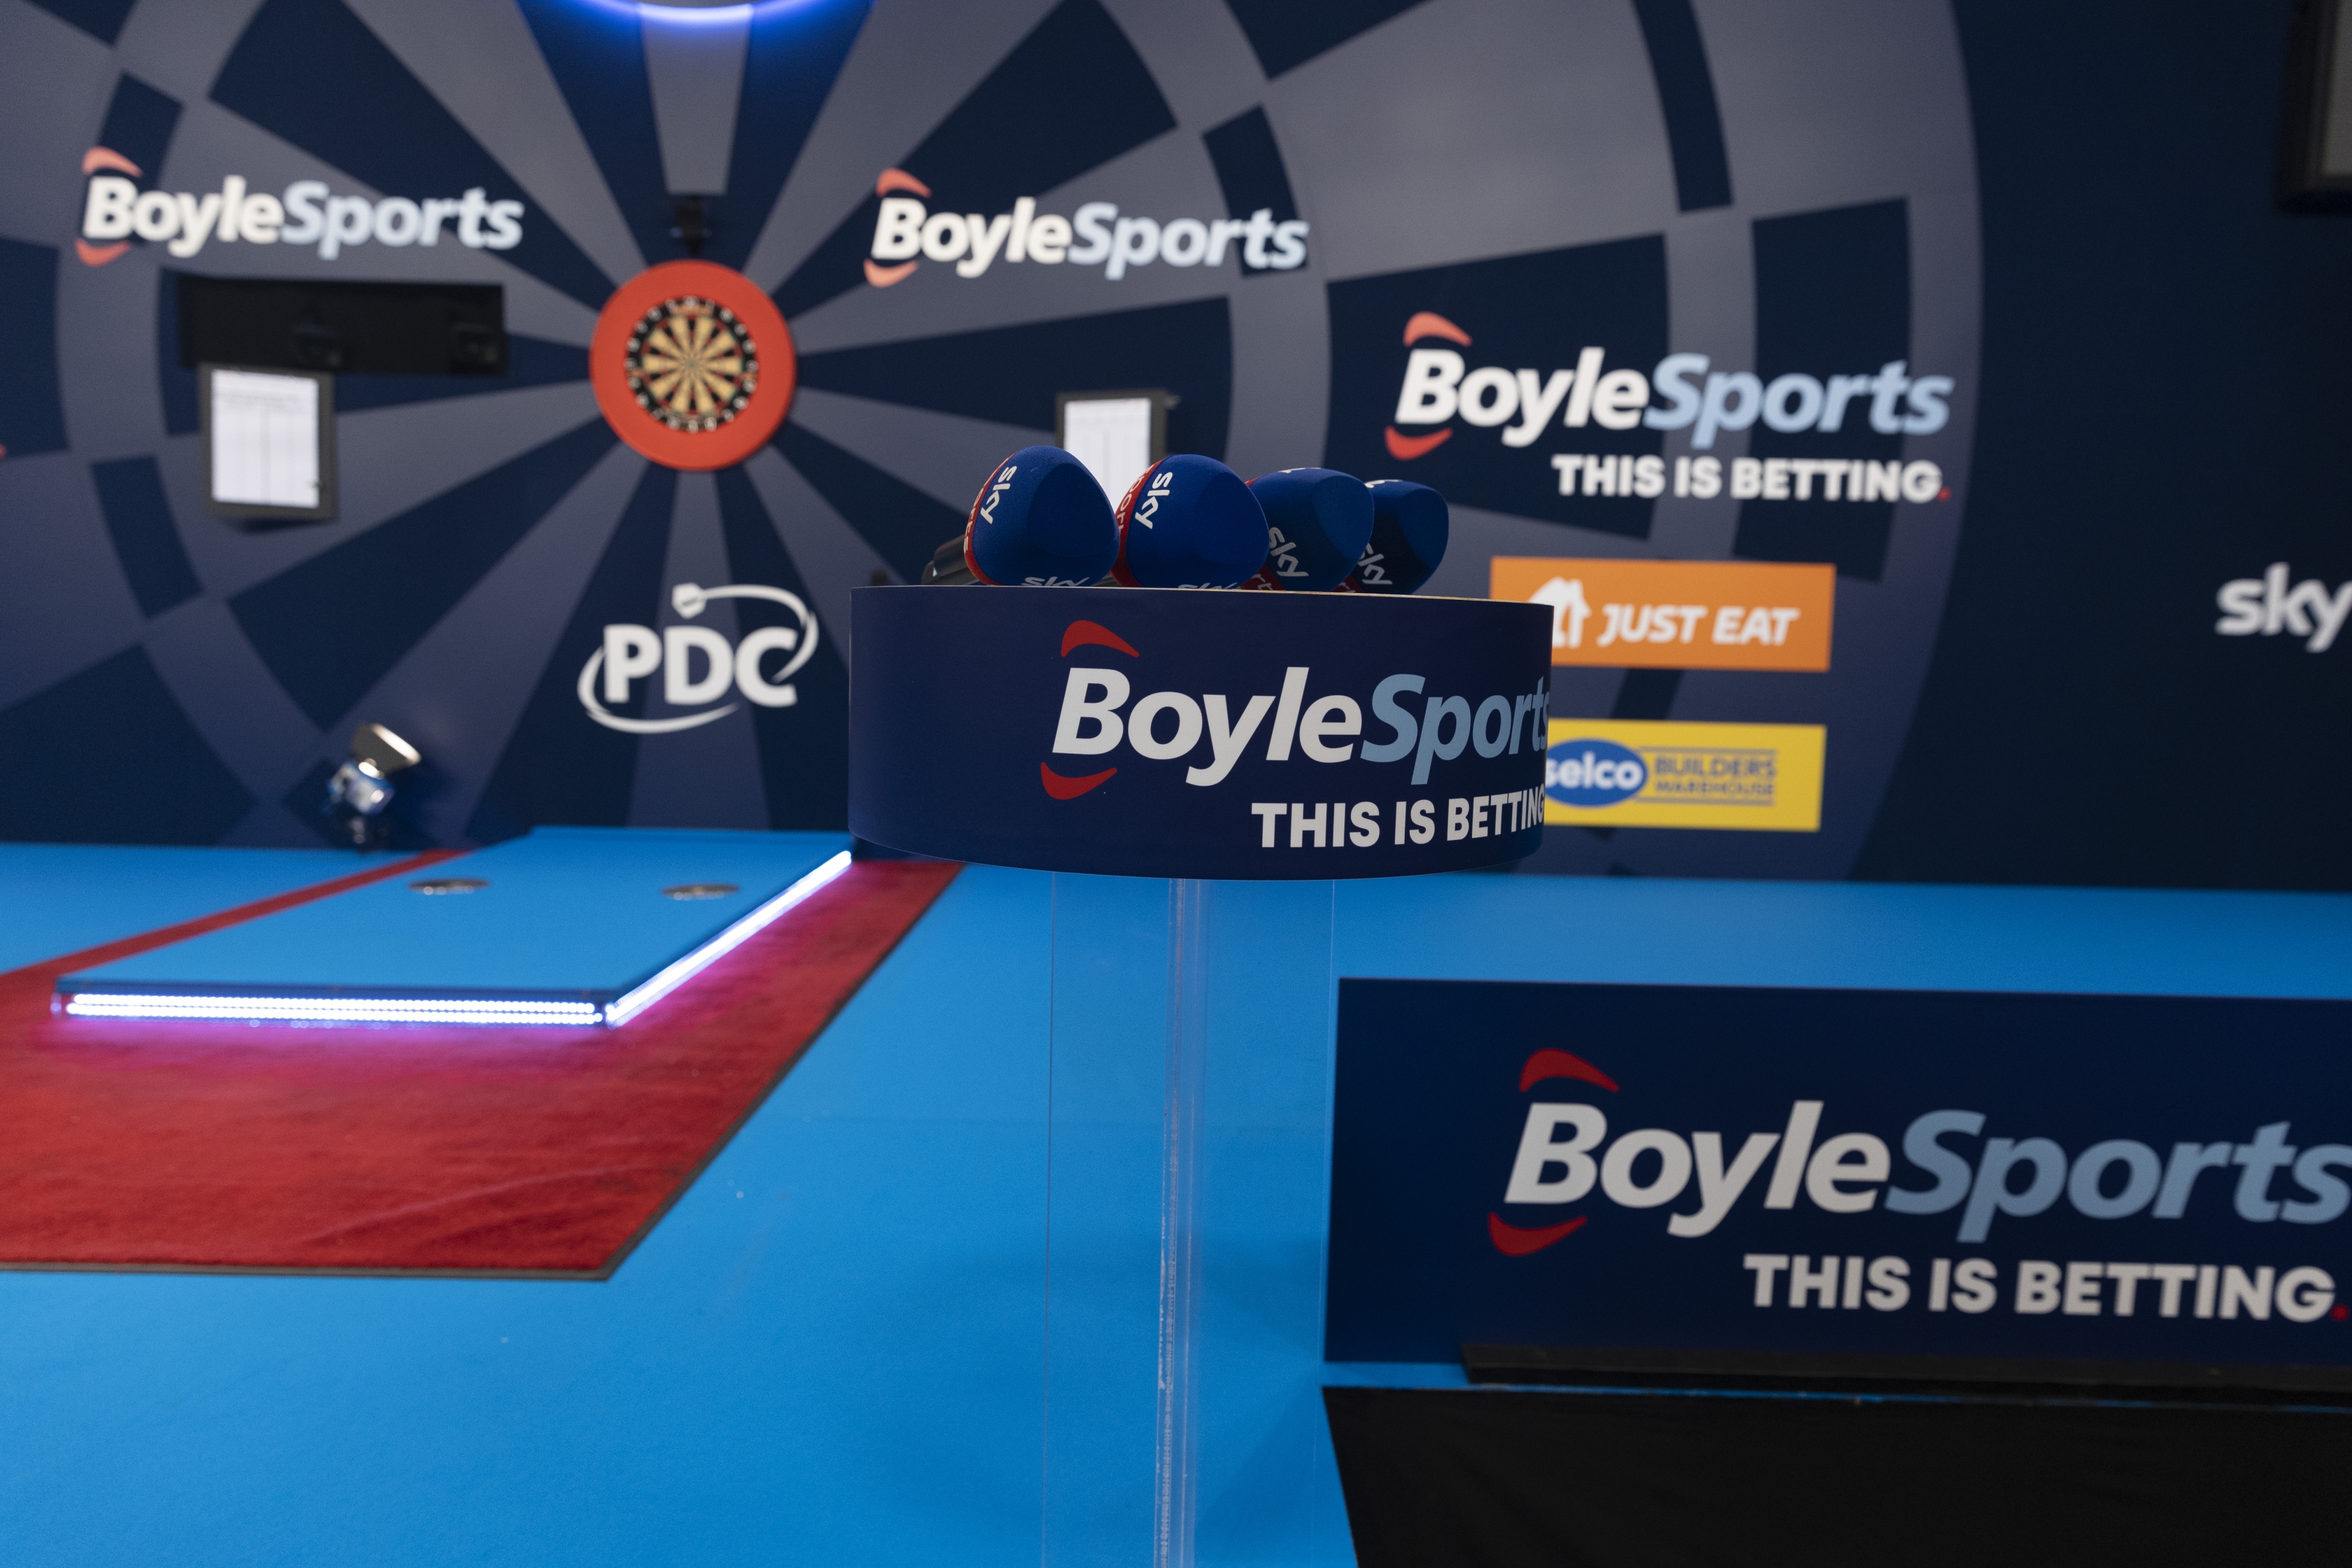 How to watch the 2021 BoyleSports World Grand Prix PDC